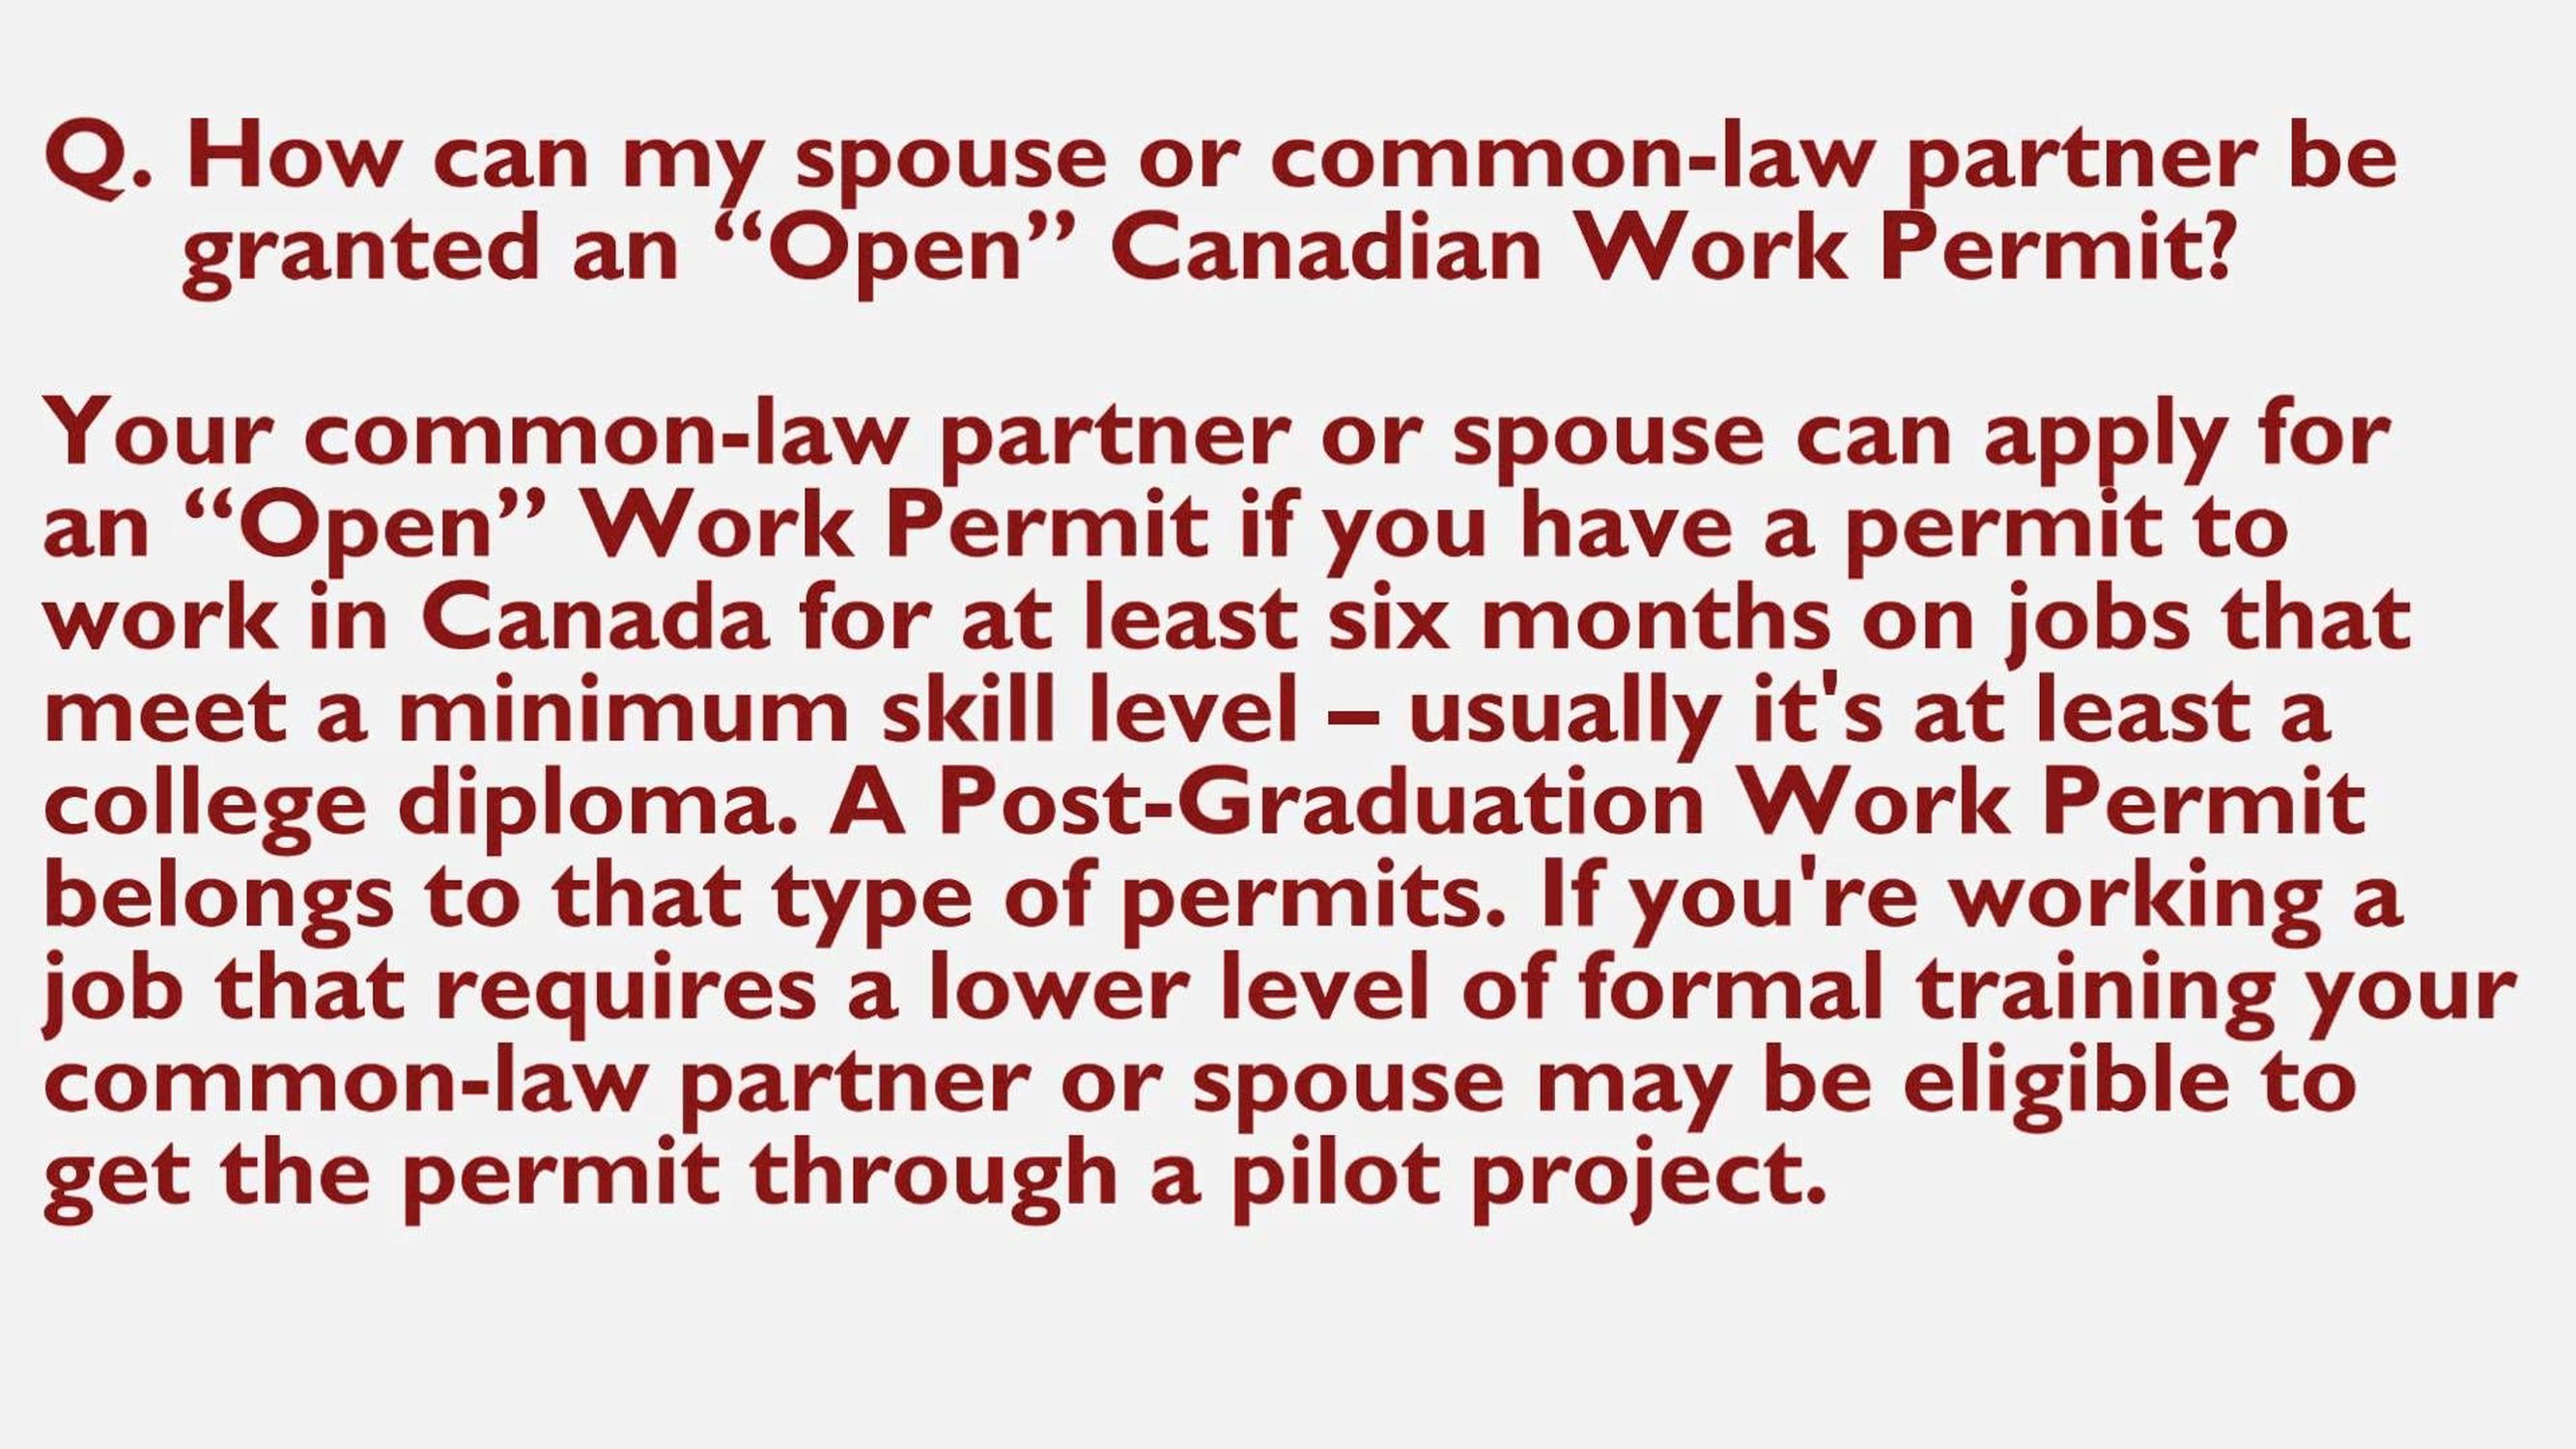 How a Student Can Apply for a Work Permit for Spouse?